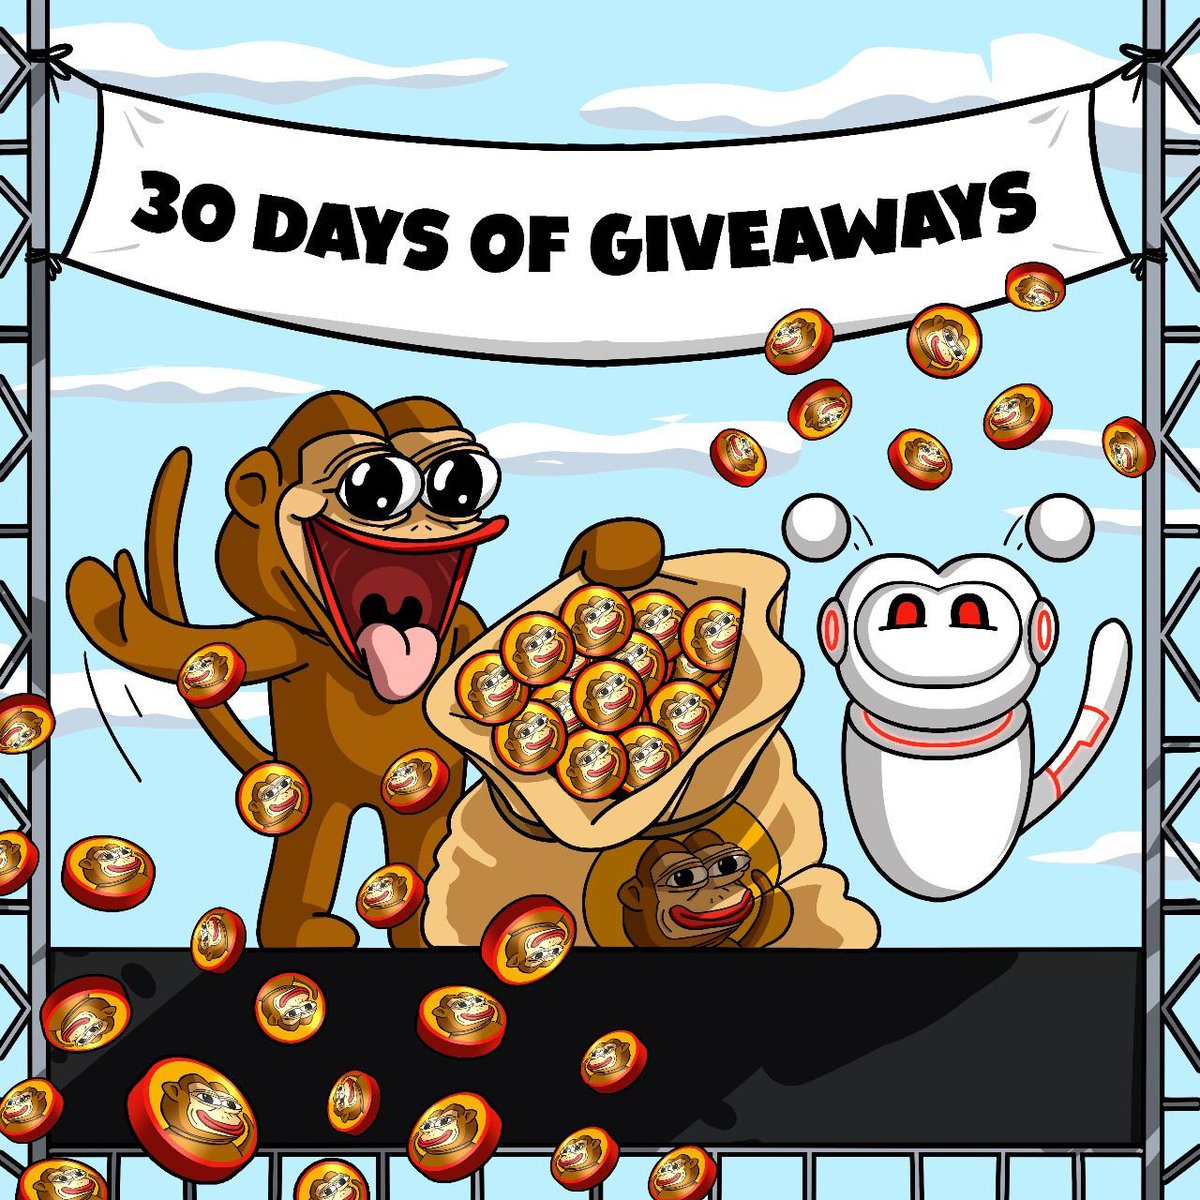 DAY 5 of 30 DAYS of #GIVEAWAYS Ponke and @memetrendbot are giving away $300 of $CBDC #PONKEARMY you know what to do 👇 👾LIKE + RT + TAG 3 DEGENS 👾FOLLOW @memetrendbot & @ponkesol 👾COMMENT 'done' below